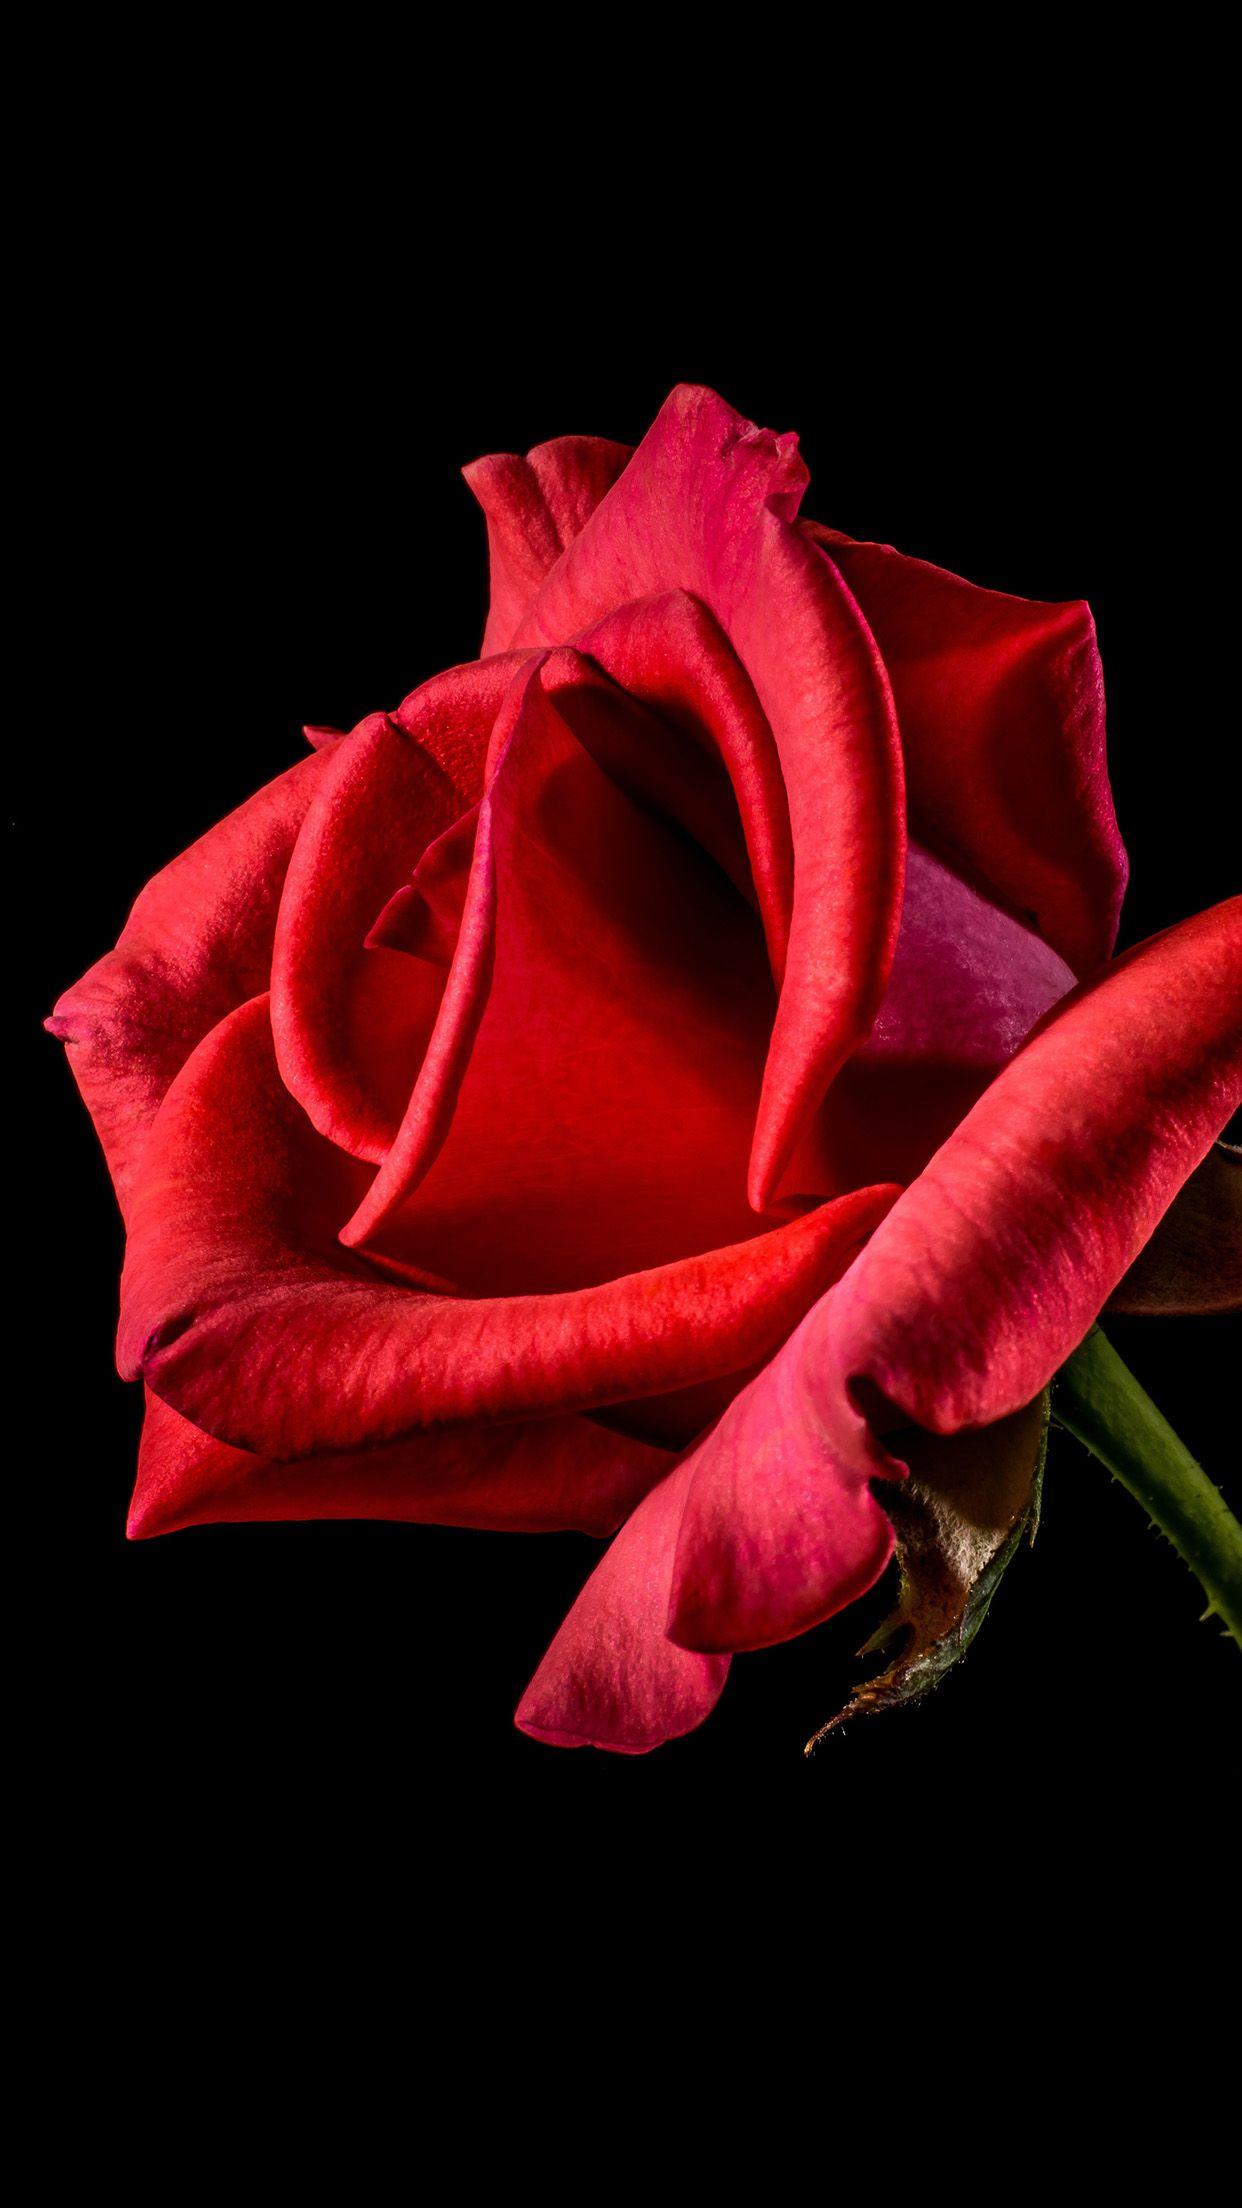 Flower Rose Red Dark Beautiful Best Nature Android wallpaper